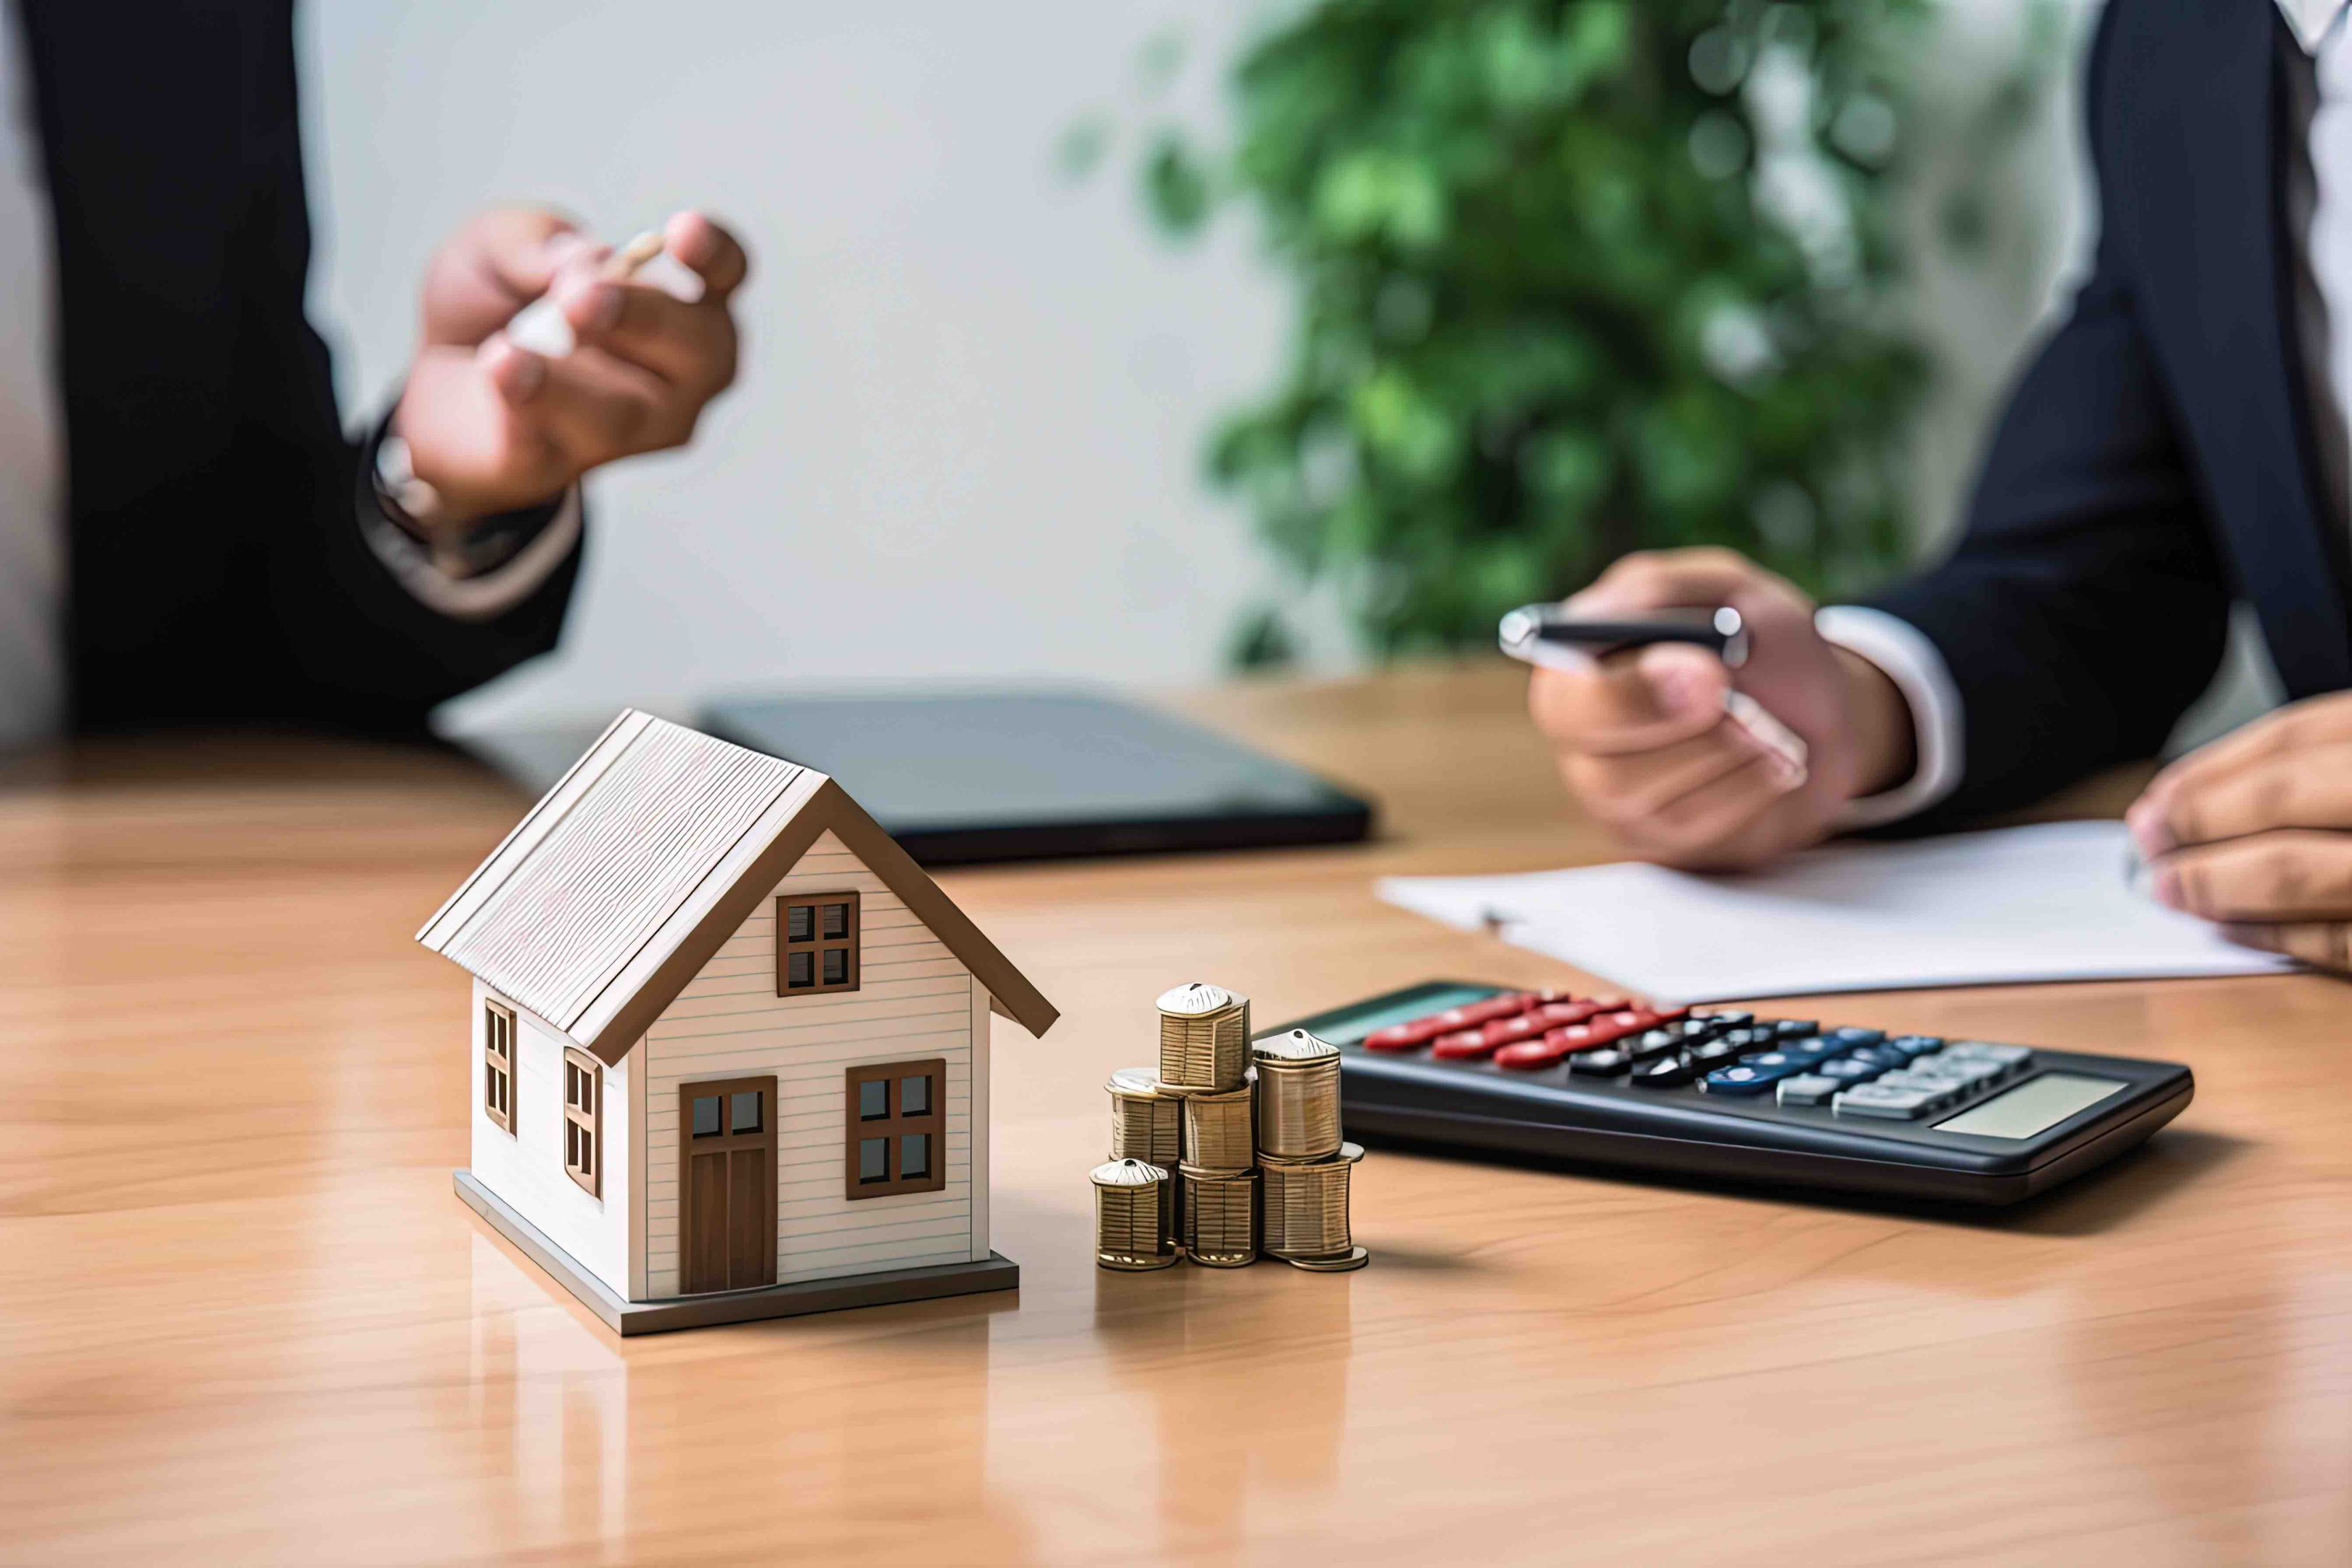 An image showing a person holding a set of keys with a house in the background, representing the availability of loans for rental property from the top lenders.